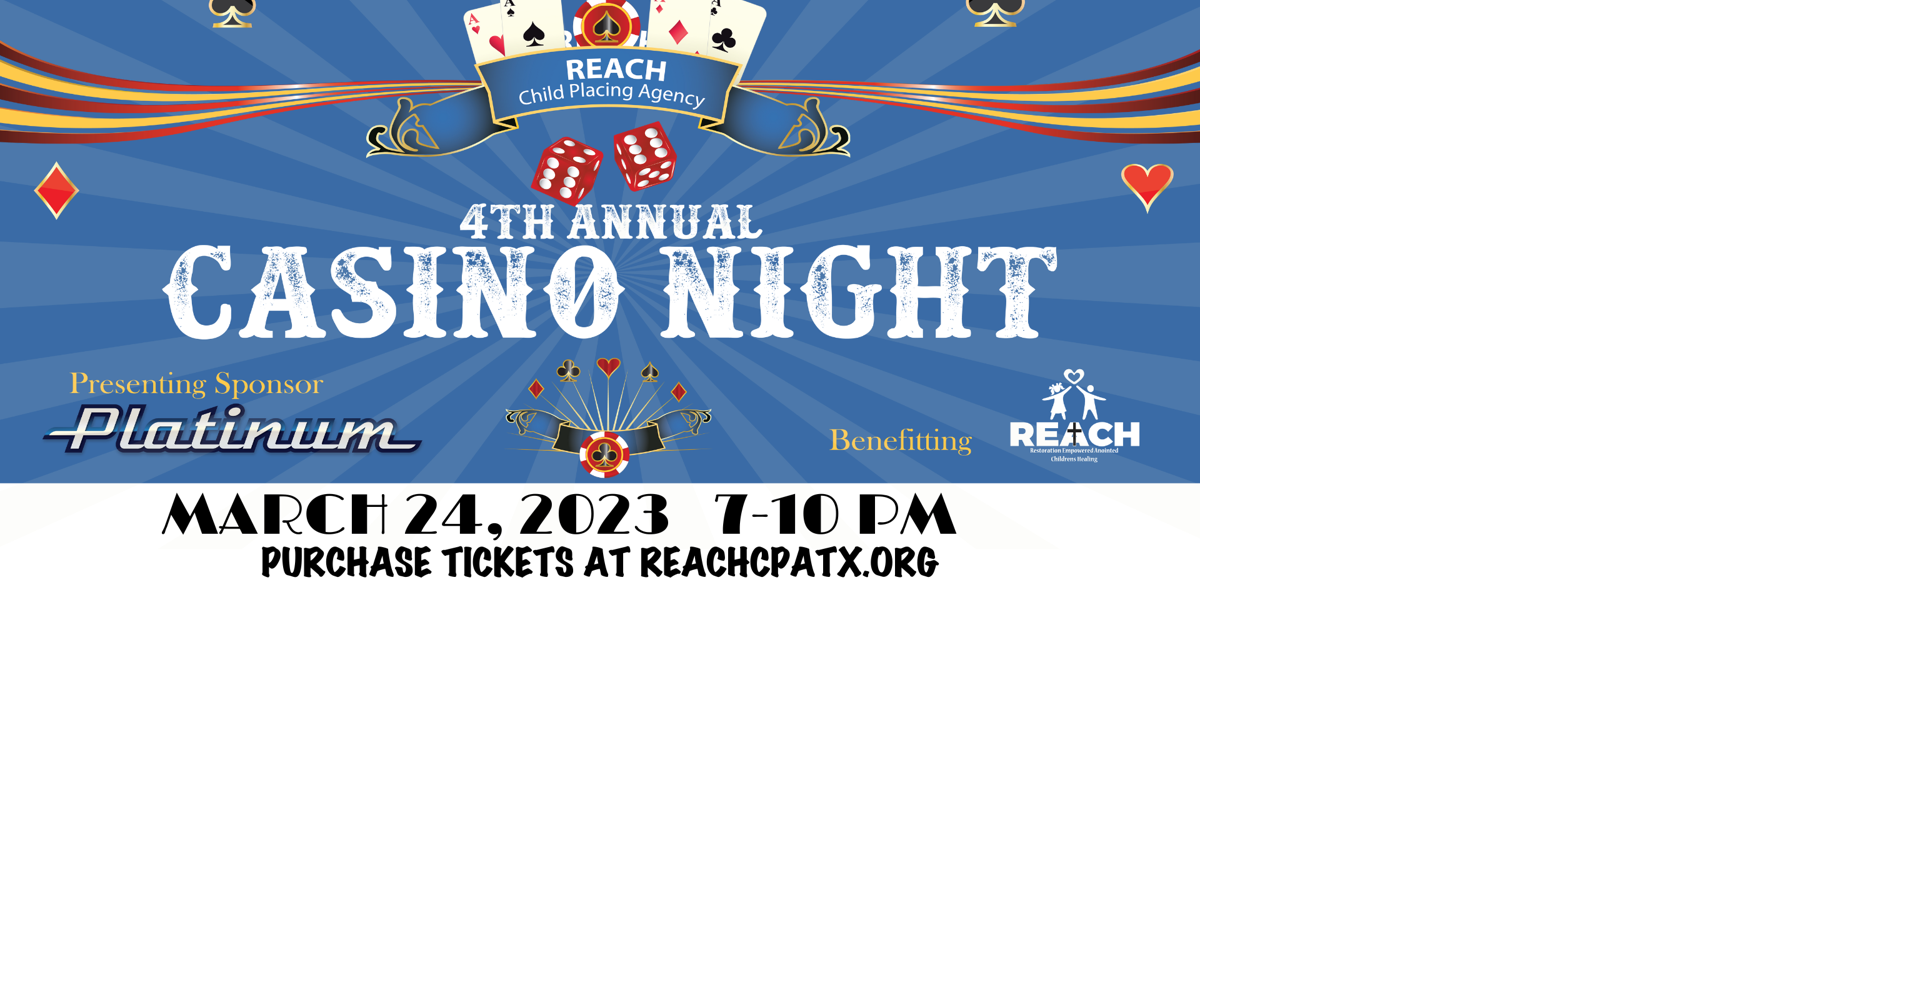 2nd Annual Charity Casino Night - The Hudson Indy Westchester's Rivertowns  News 